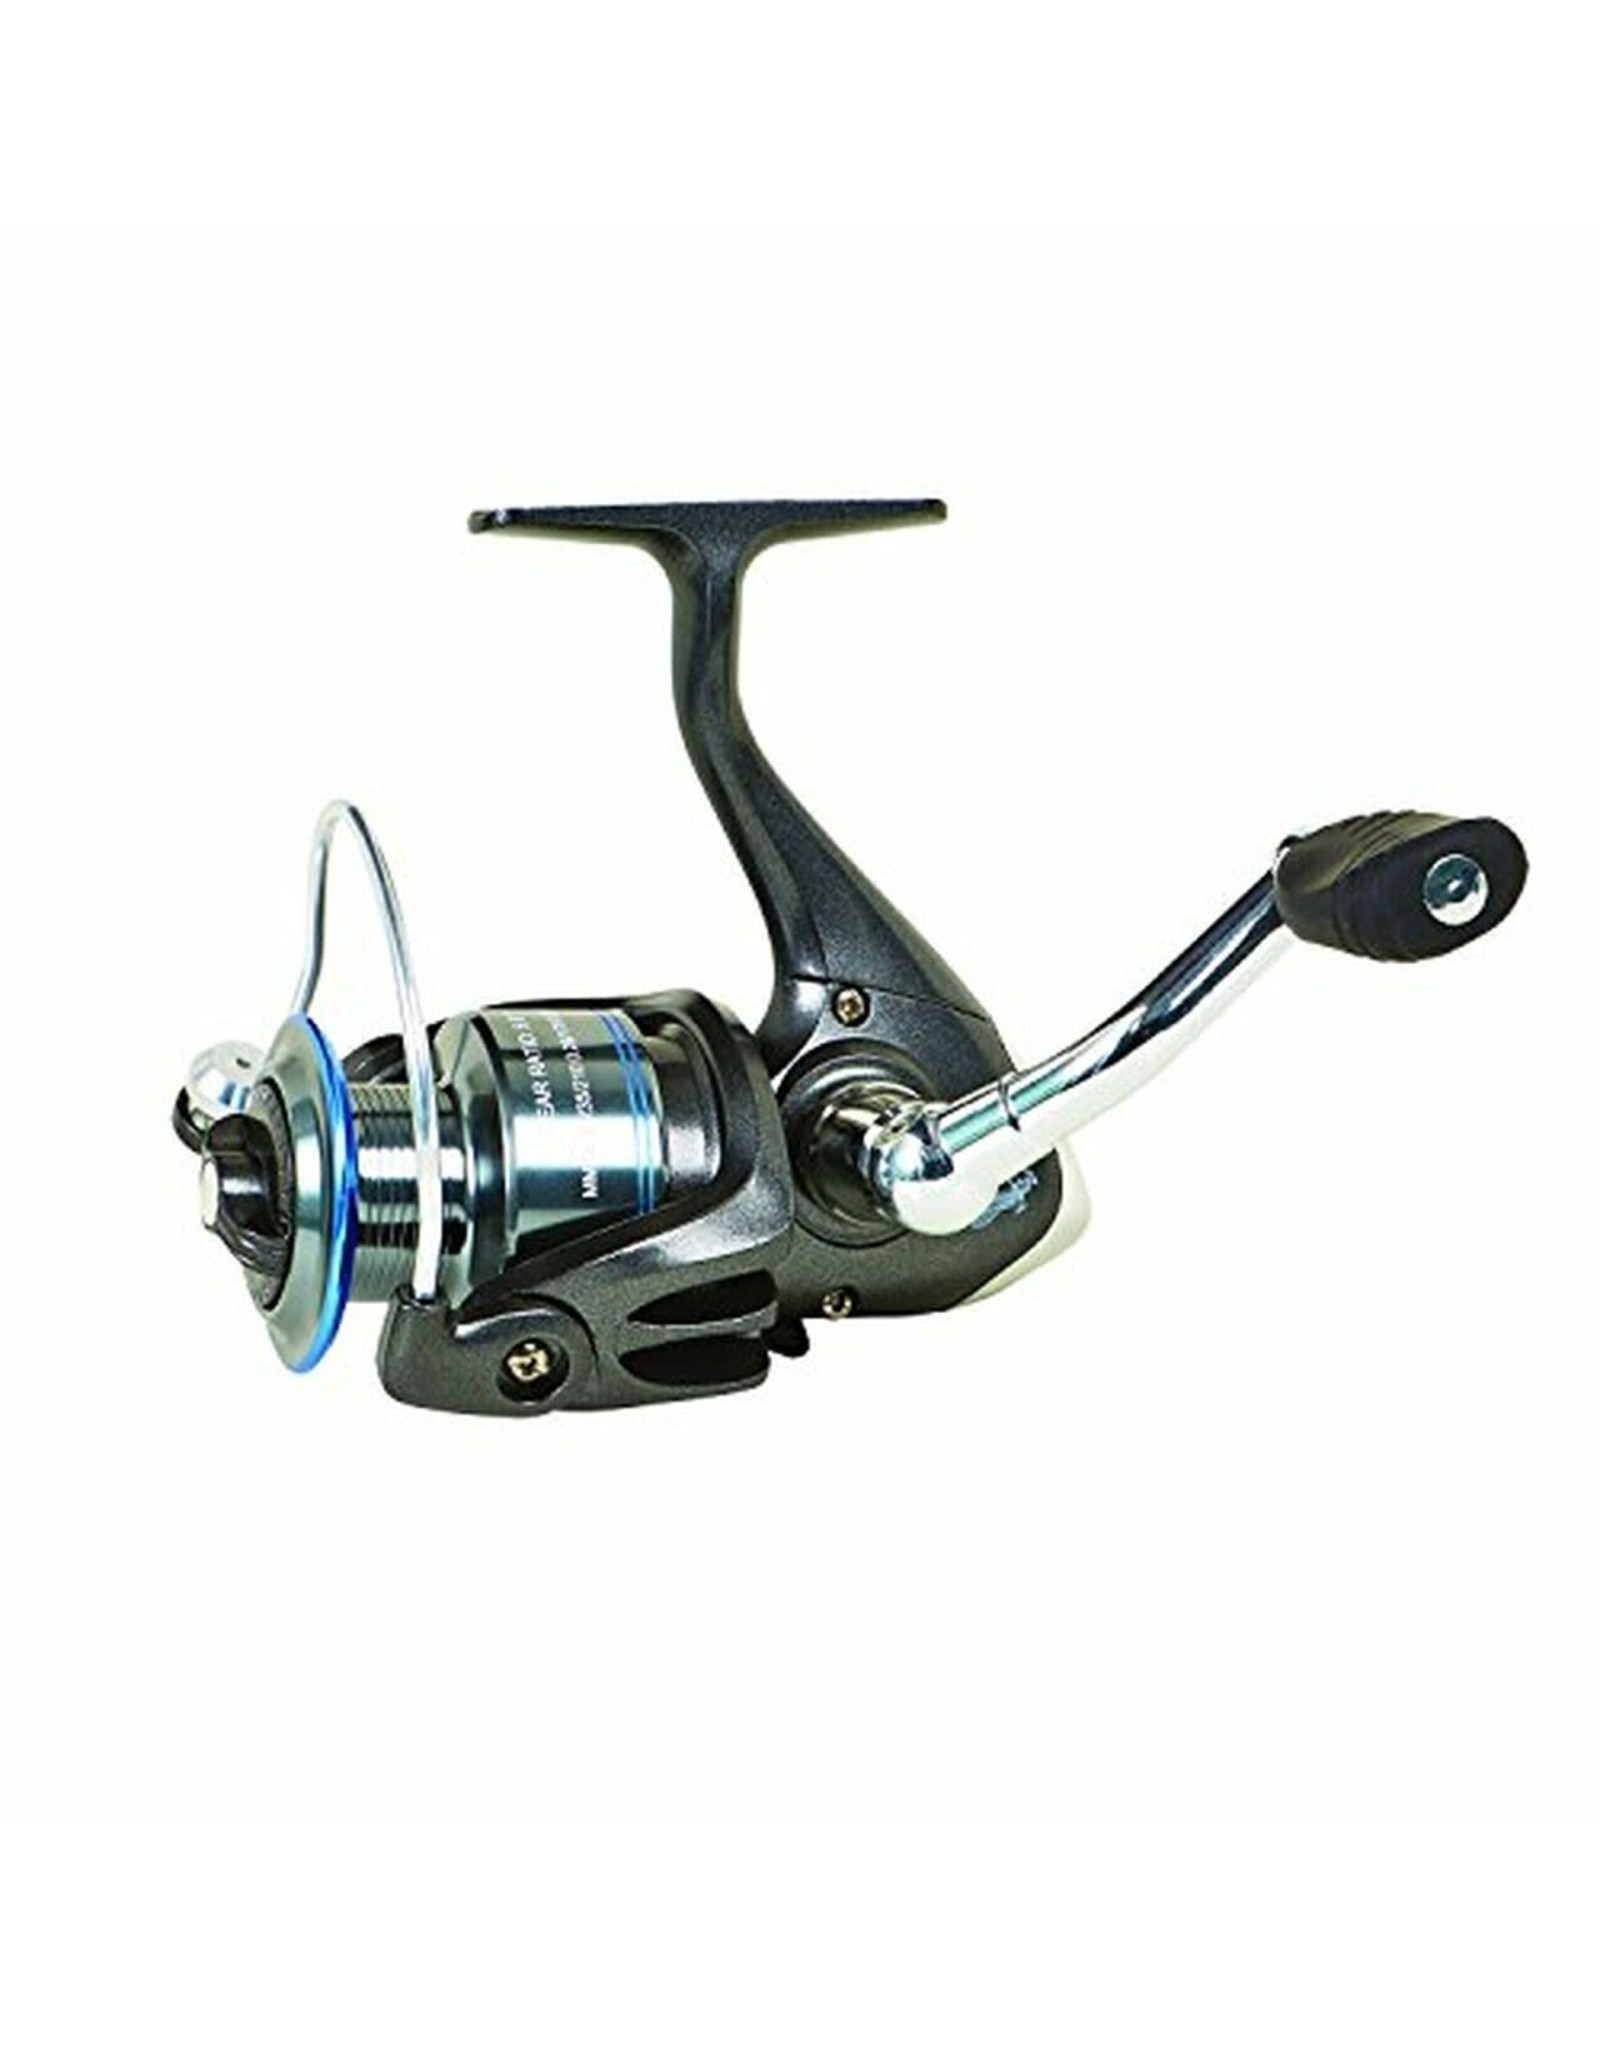 Eagle Claw CIN-20 Cimarron Spin Reel, RH, 2BB + 1RB, 5.2:1 Ratio - Larry's  Sporting Goods